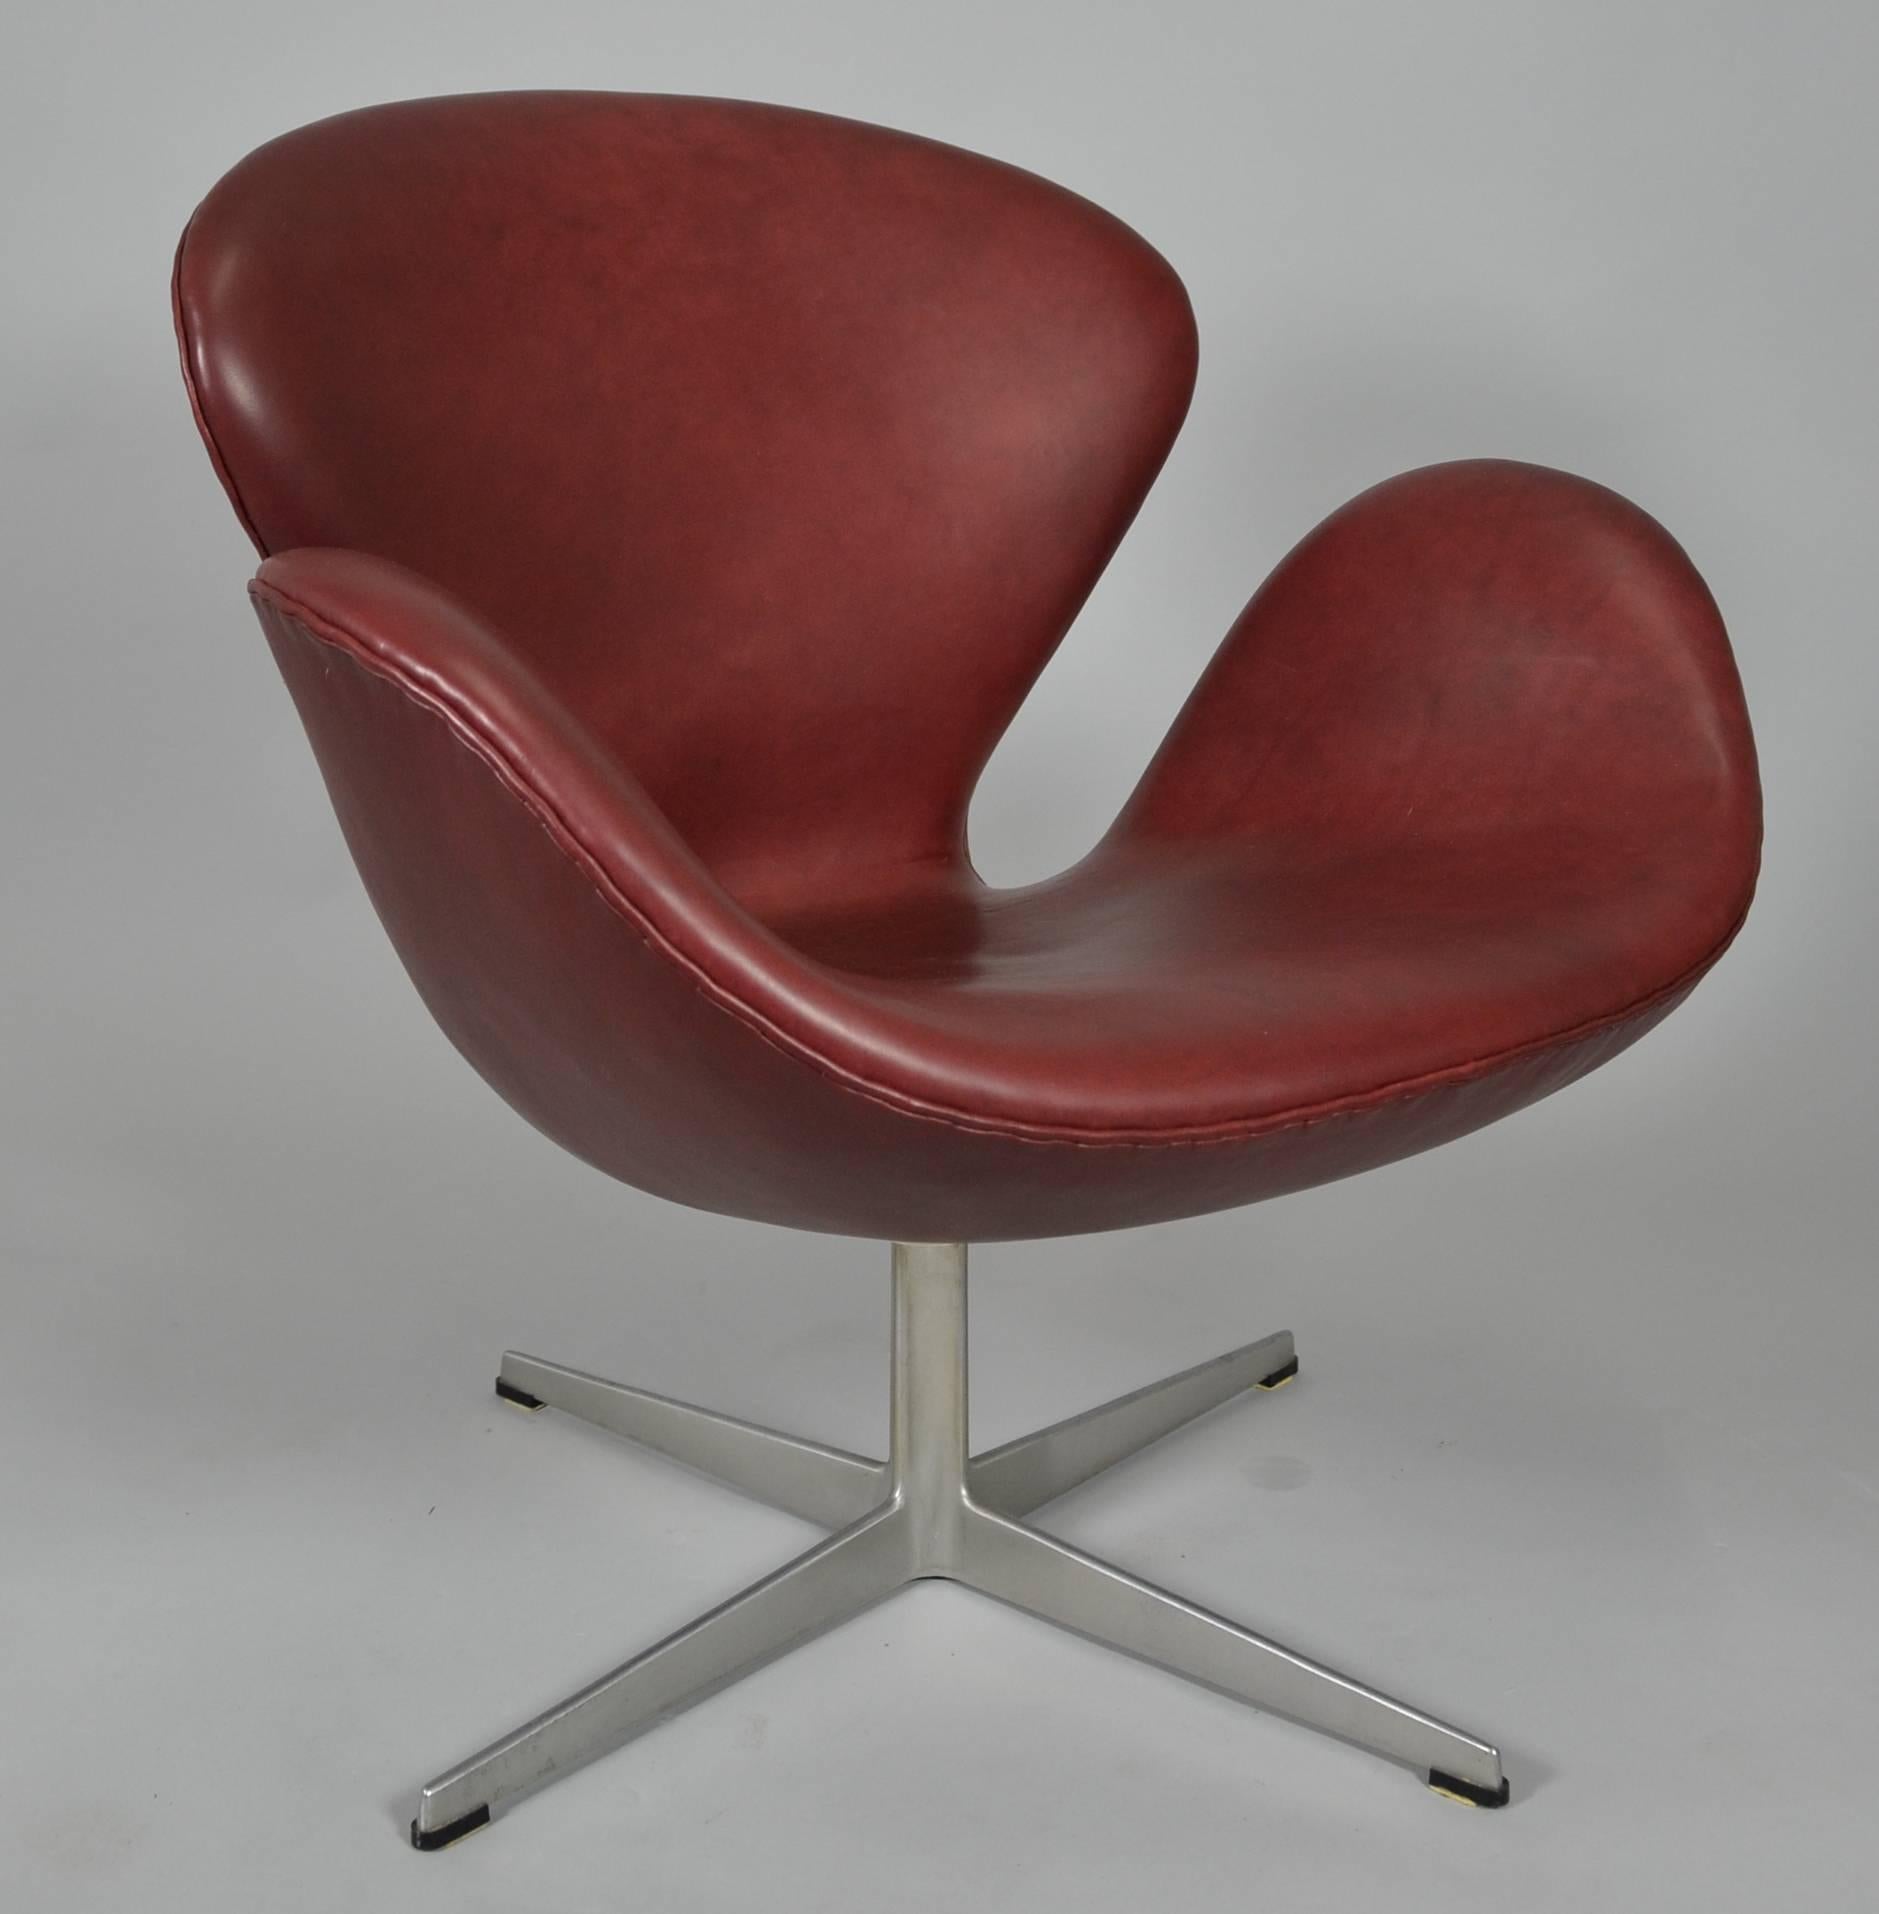 Danish Pair of Swan Chairs by Arne Jacobsen in Bordeaux Leather